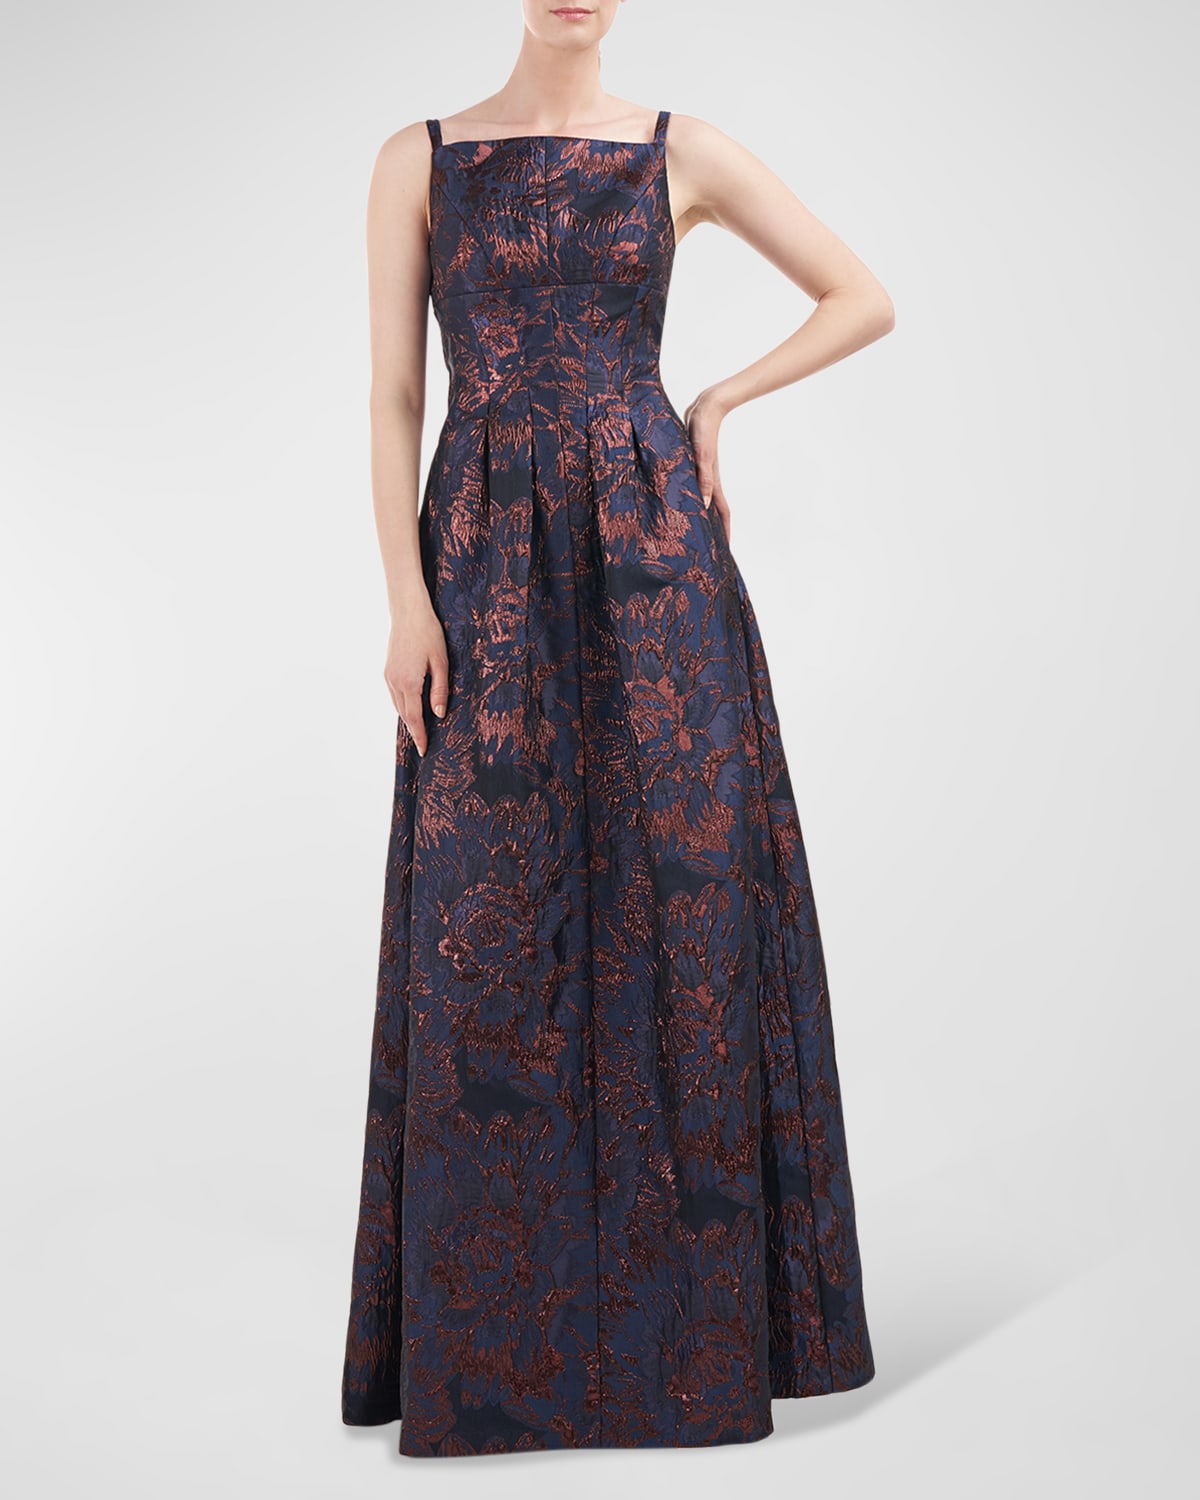 Kay Unger New York Pleated Metallic Floral Jacquard Gown